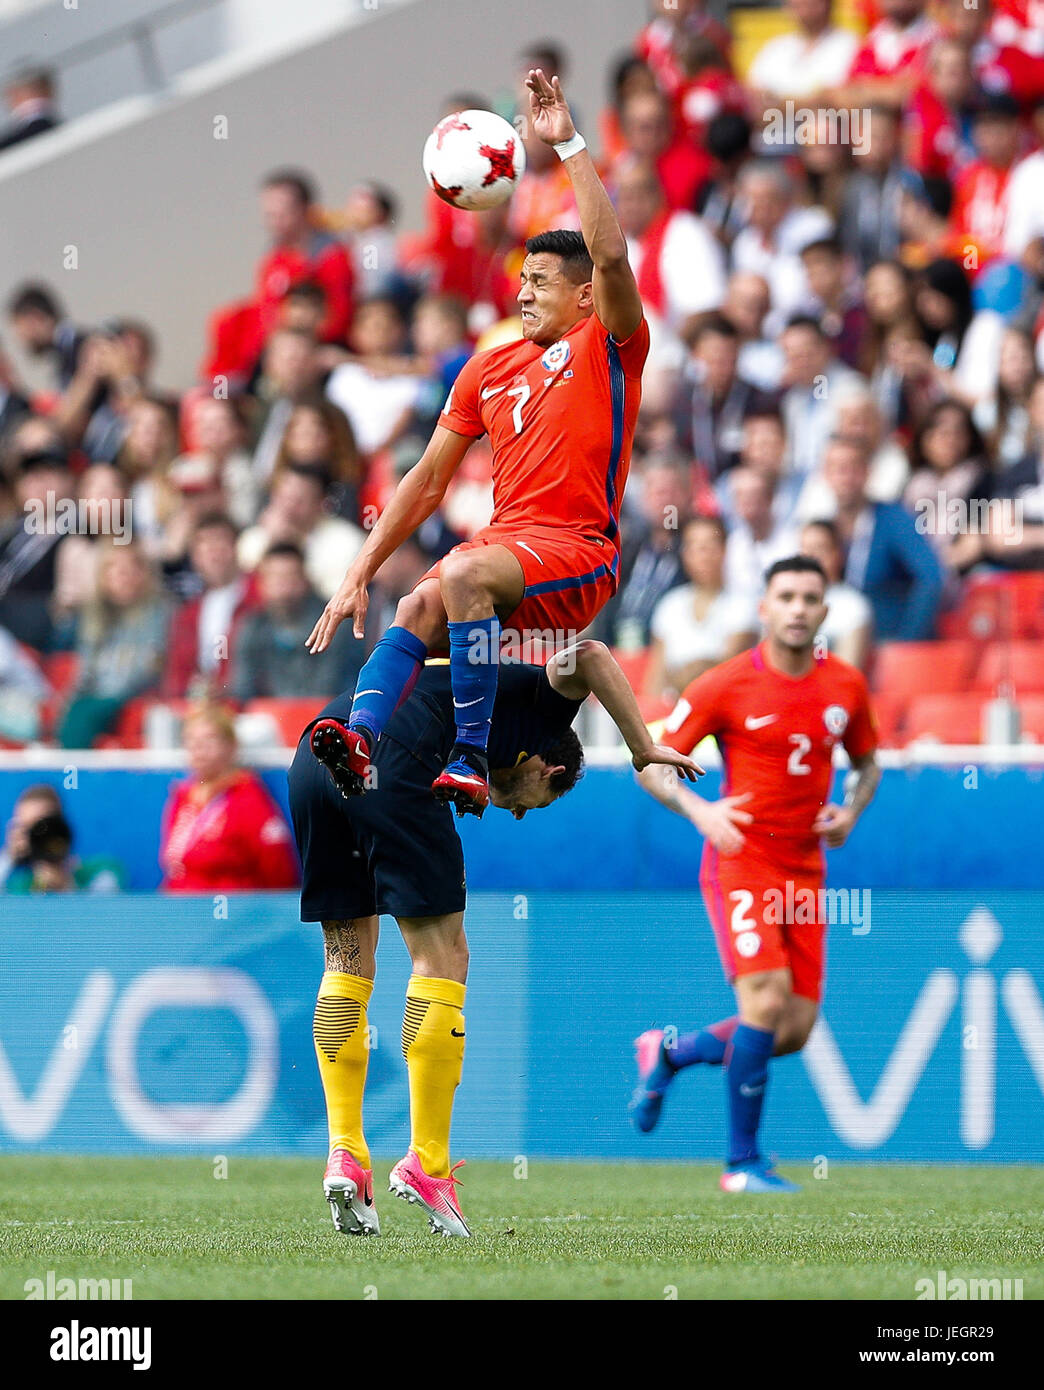 Moscow, Russia. 25th Jun, 2017. SANCHEZ Alexis from Chile plays for JURIC Tomi from Australia during a match between Chile and Australia for the third round of the 2017 Confederations Cup on Sunday (25th) at Spartak Stadium (Otkrytie Arena) in Moscow, Russia. Credit: Foto Arena LTDA/Alamy Live News Credit: Foto Arena LTDA/Alamy Live News Credit: Foto Arena LTDA/Alamy Live News Credit: Foto Arena LTDA/Alamy Live News Credit: Foto Arena LTDA/Alamy Live News Stock Photo